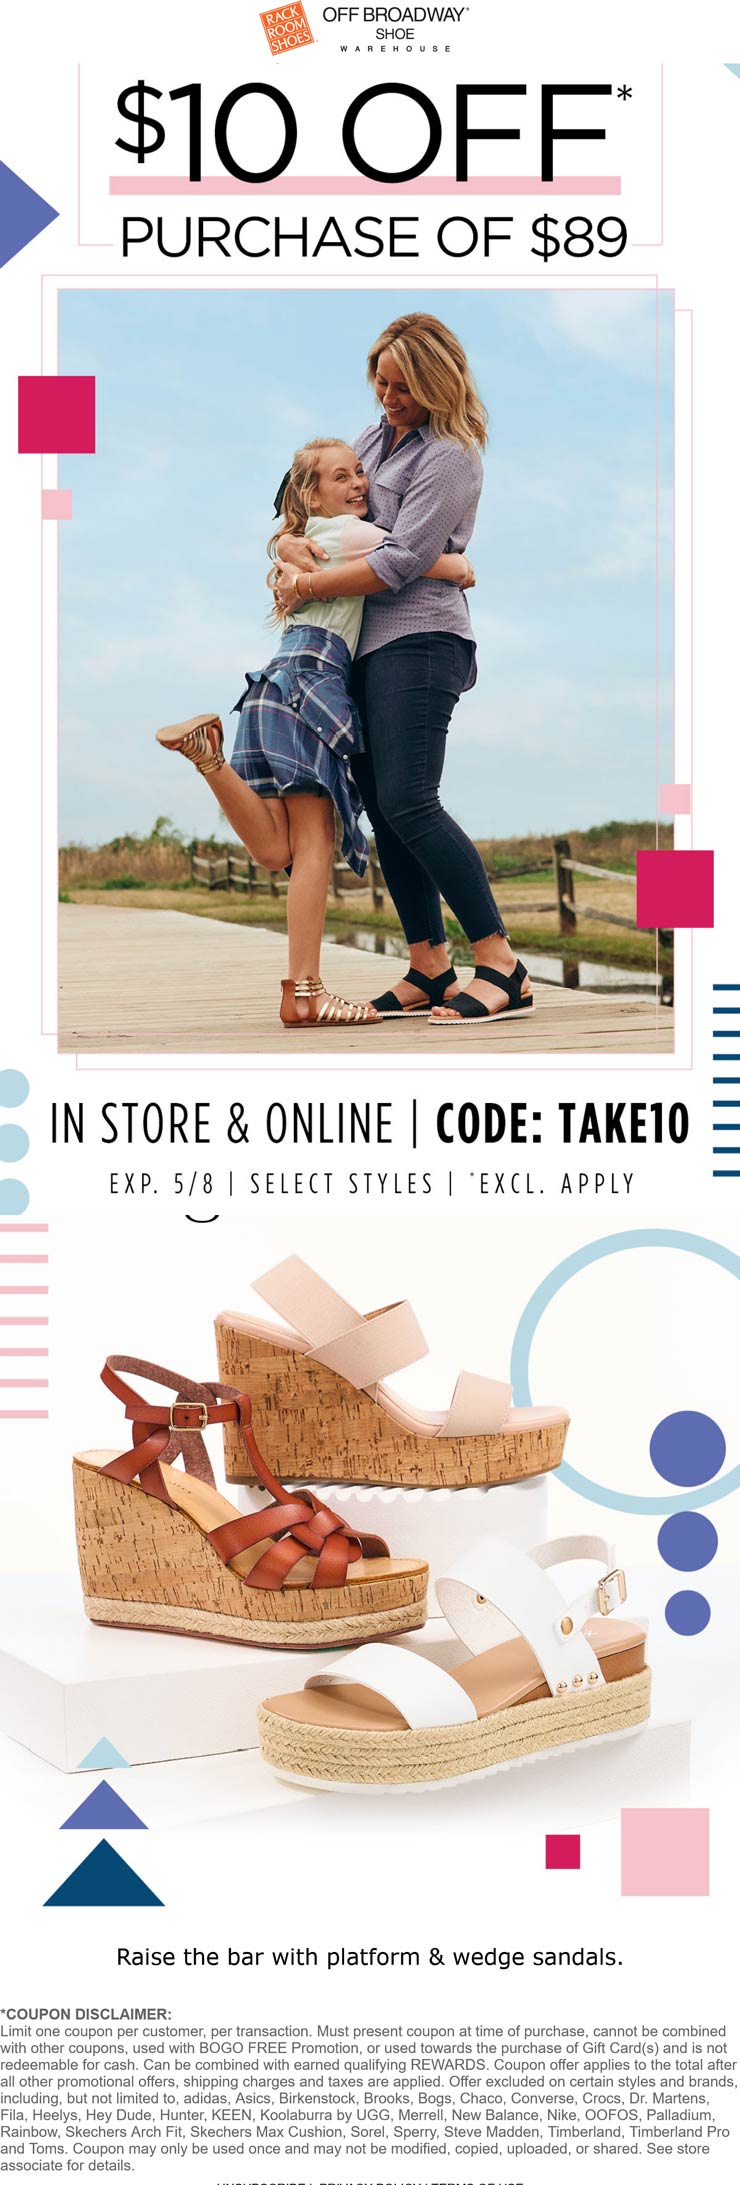 Rack Room Shoes stores Coupon  $10 off $89 at Rack Room Shoes & Off Broadway Shoe Warehouse, or online via promo code TAKE10 #rackroomshoes 